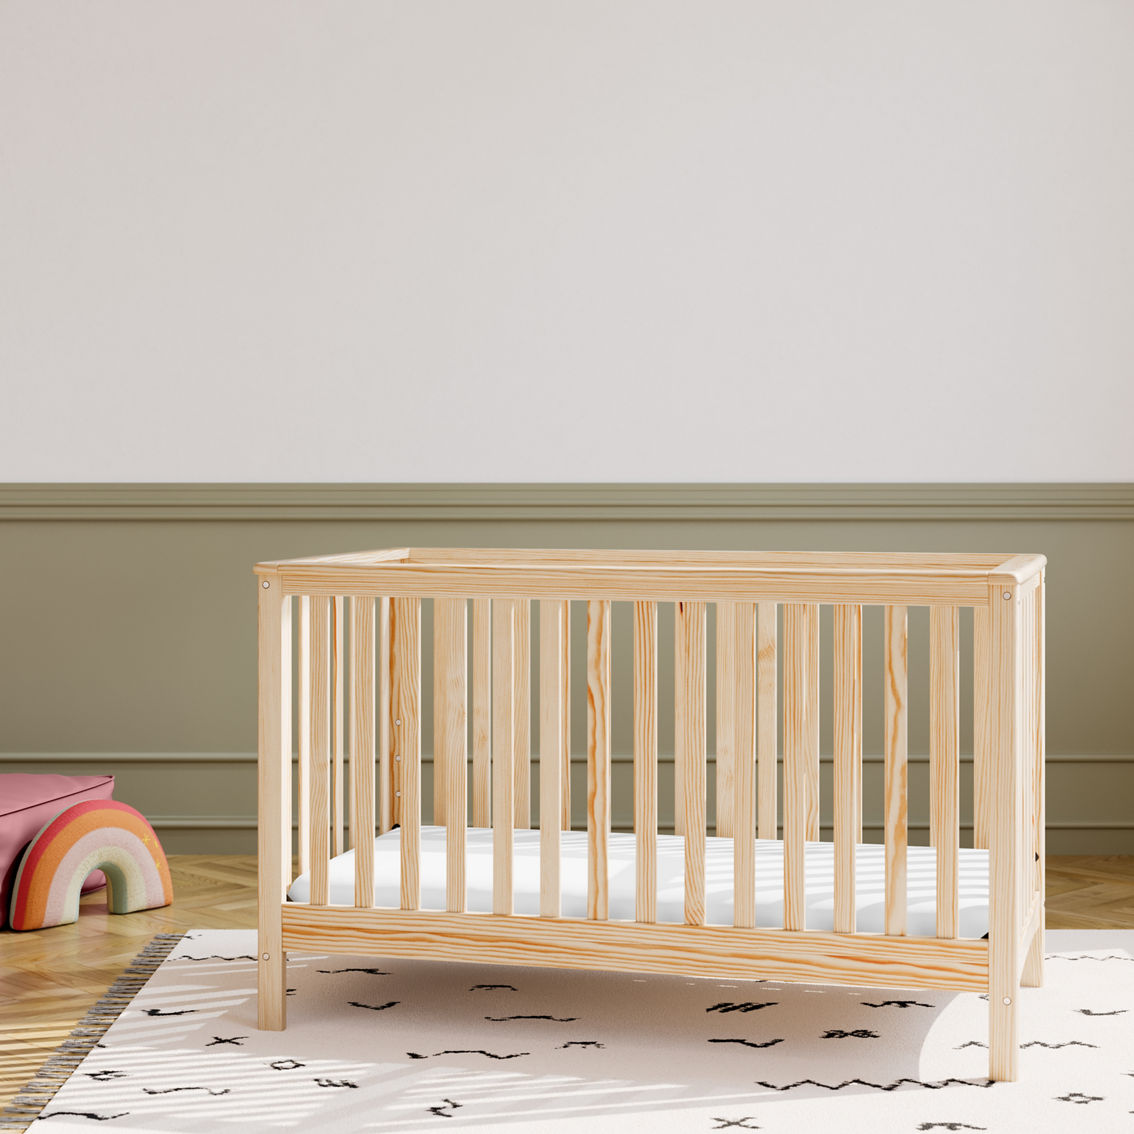 Storkcraft Hillcrest 4-in-1 Convertible Crib - Natural - Image 7 of 7